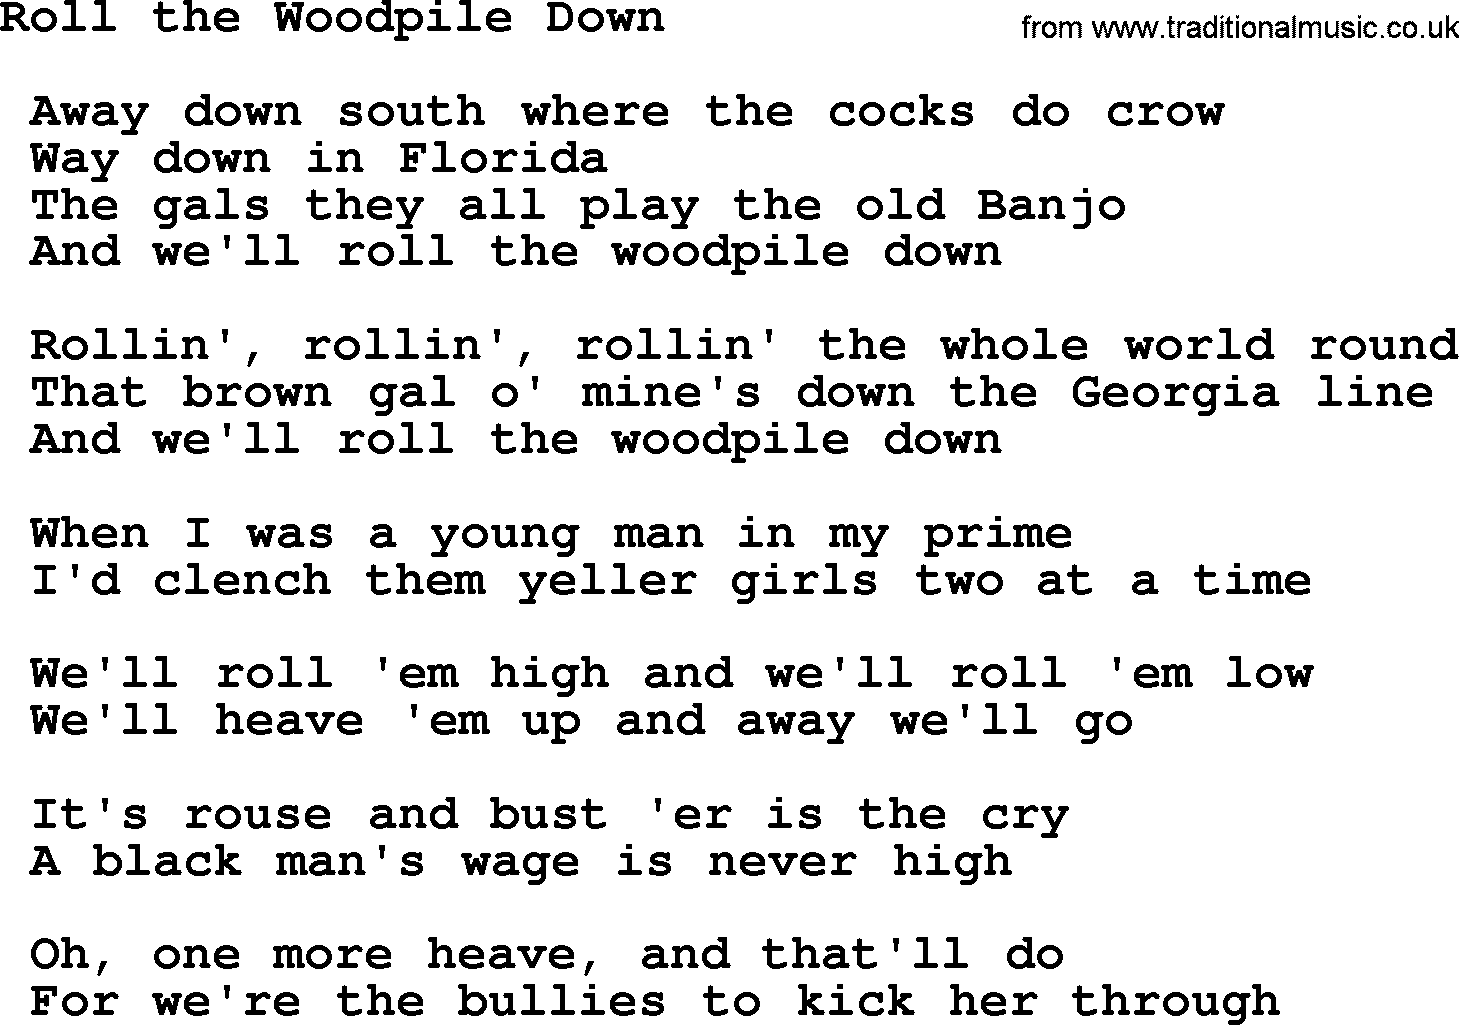 Sea Song or Shantie: Roll The Woodpile Down, lyrics